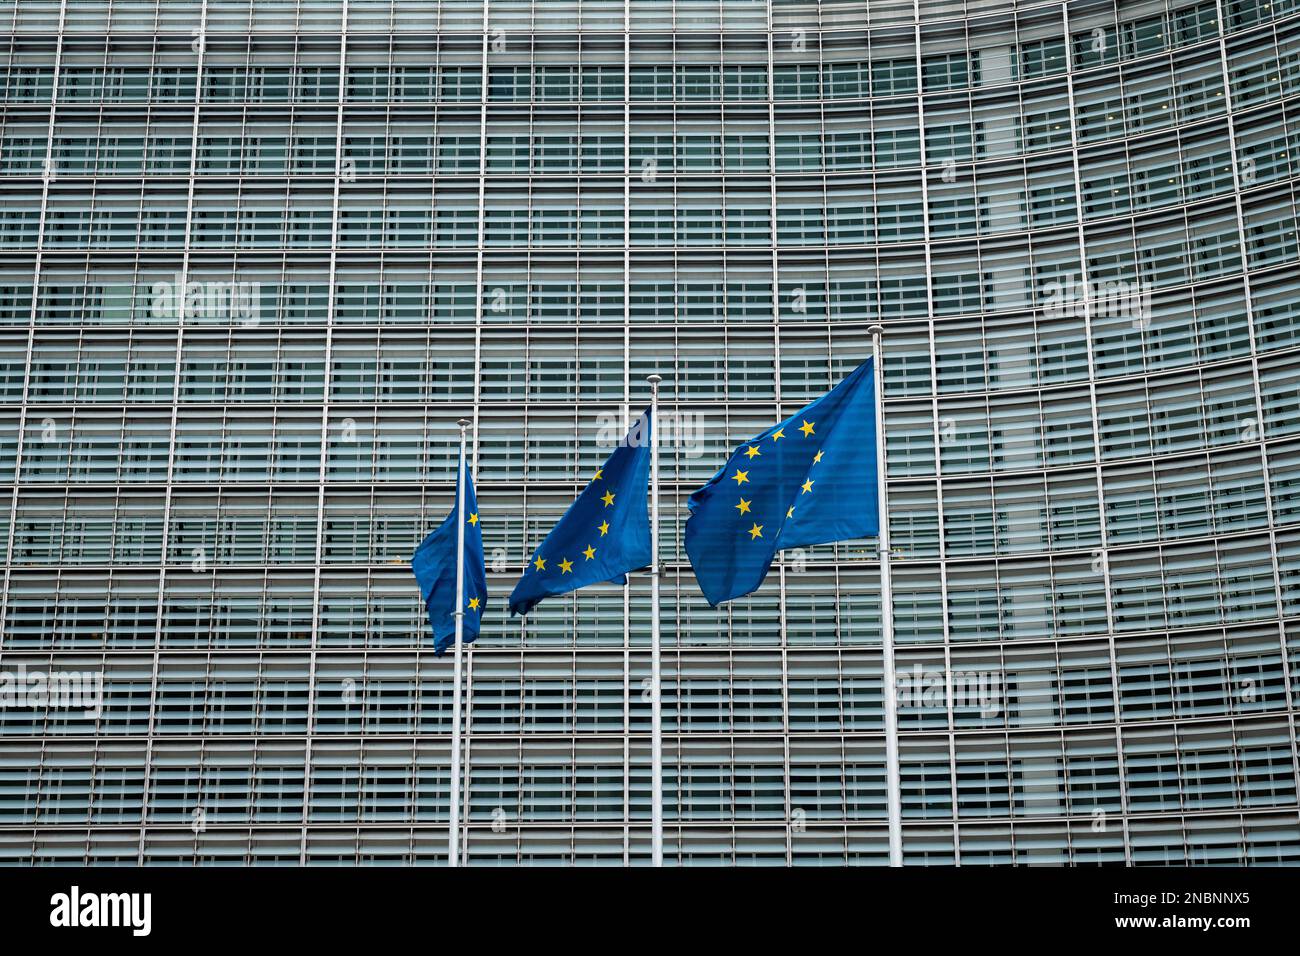 The Le Berlaymont building at Schuman in Brussels Stock Photo